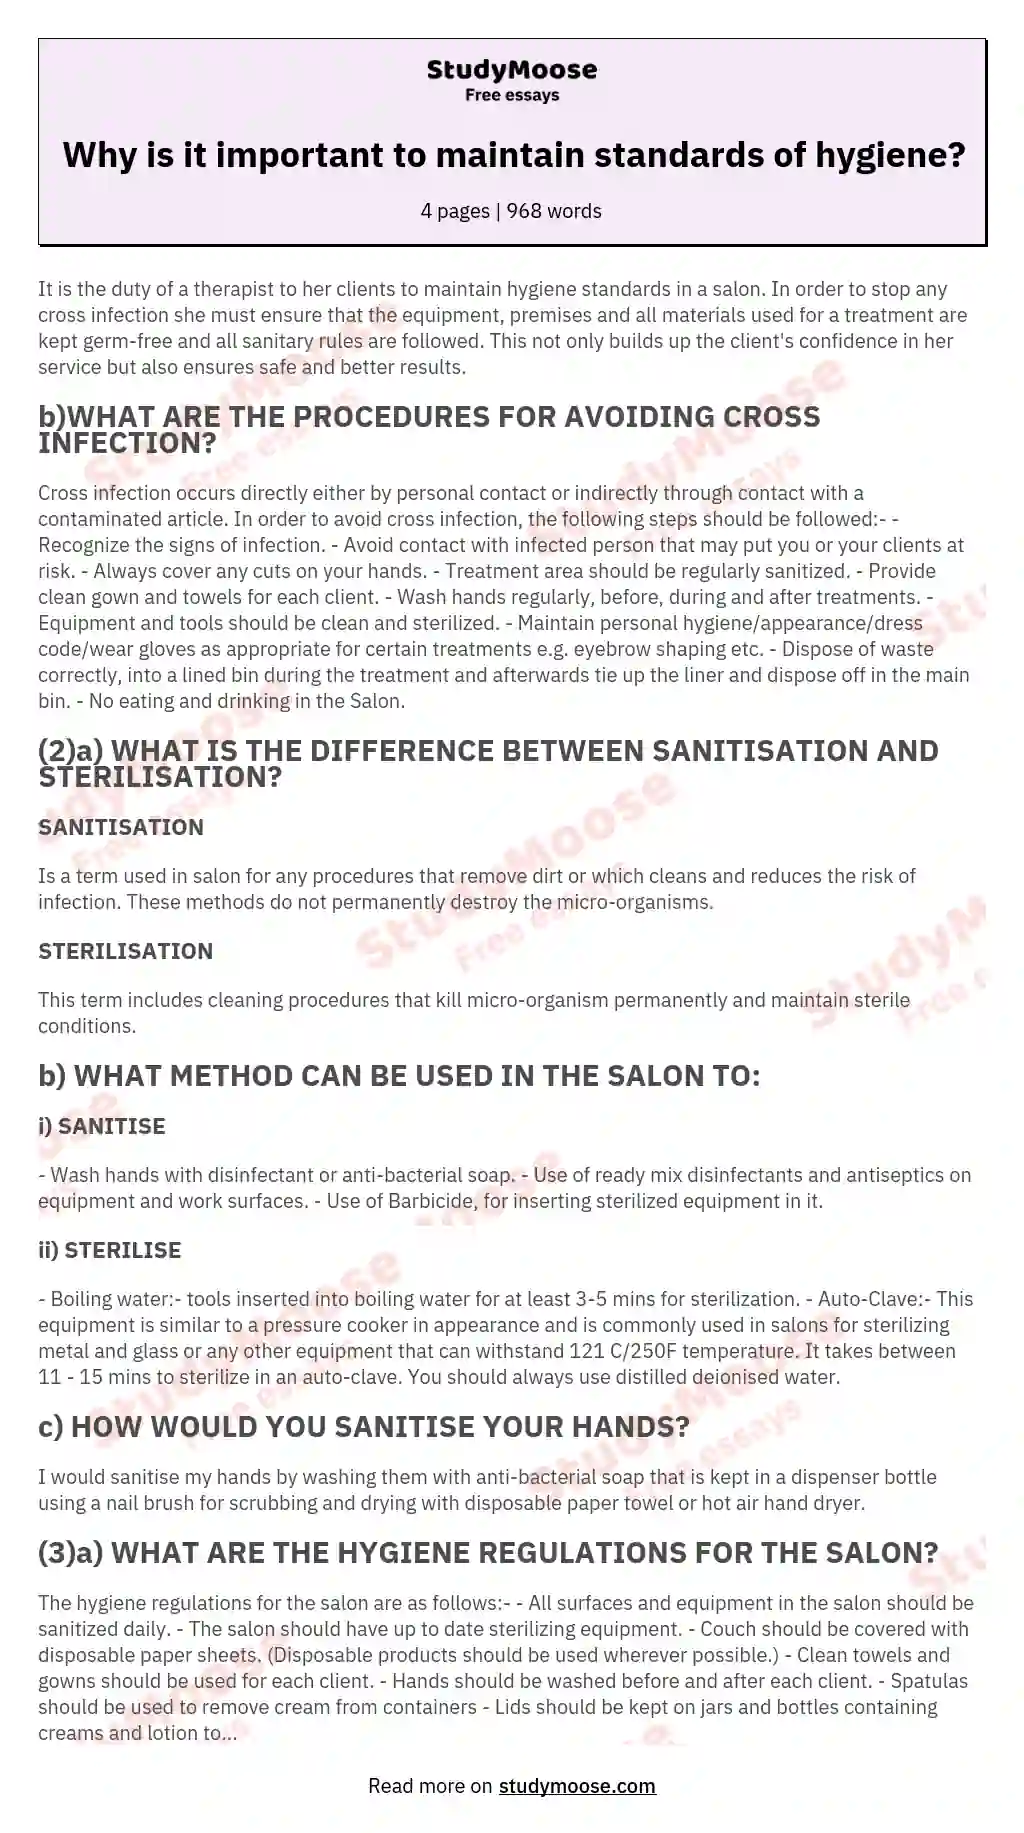 Why is it important to maintain standards of hygiene? essay